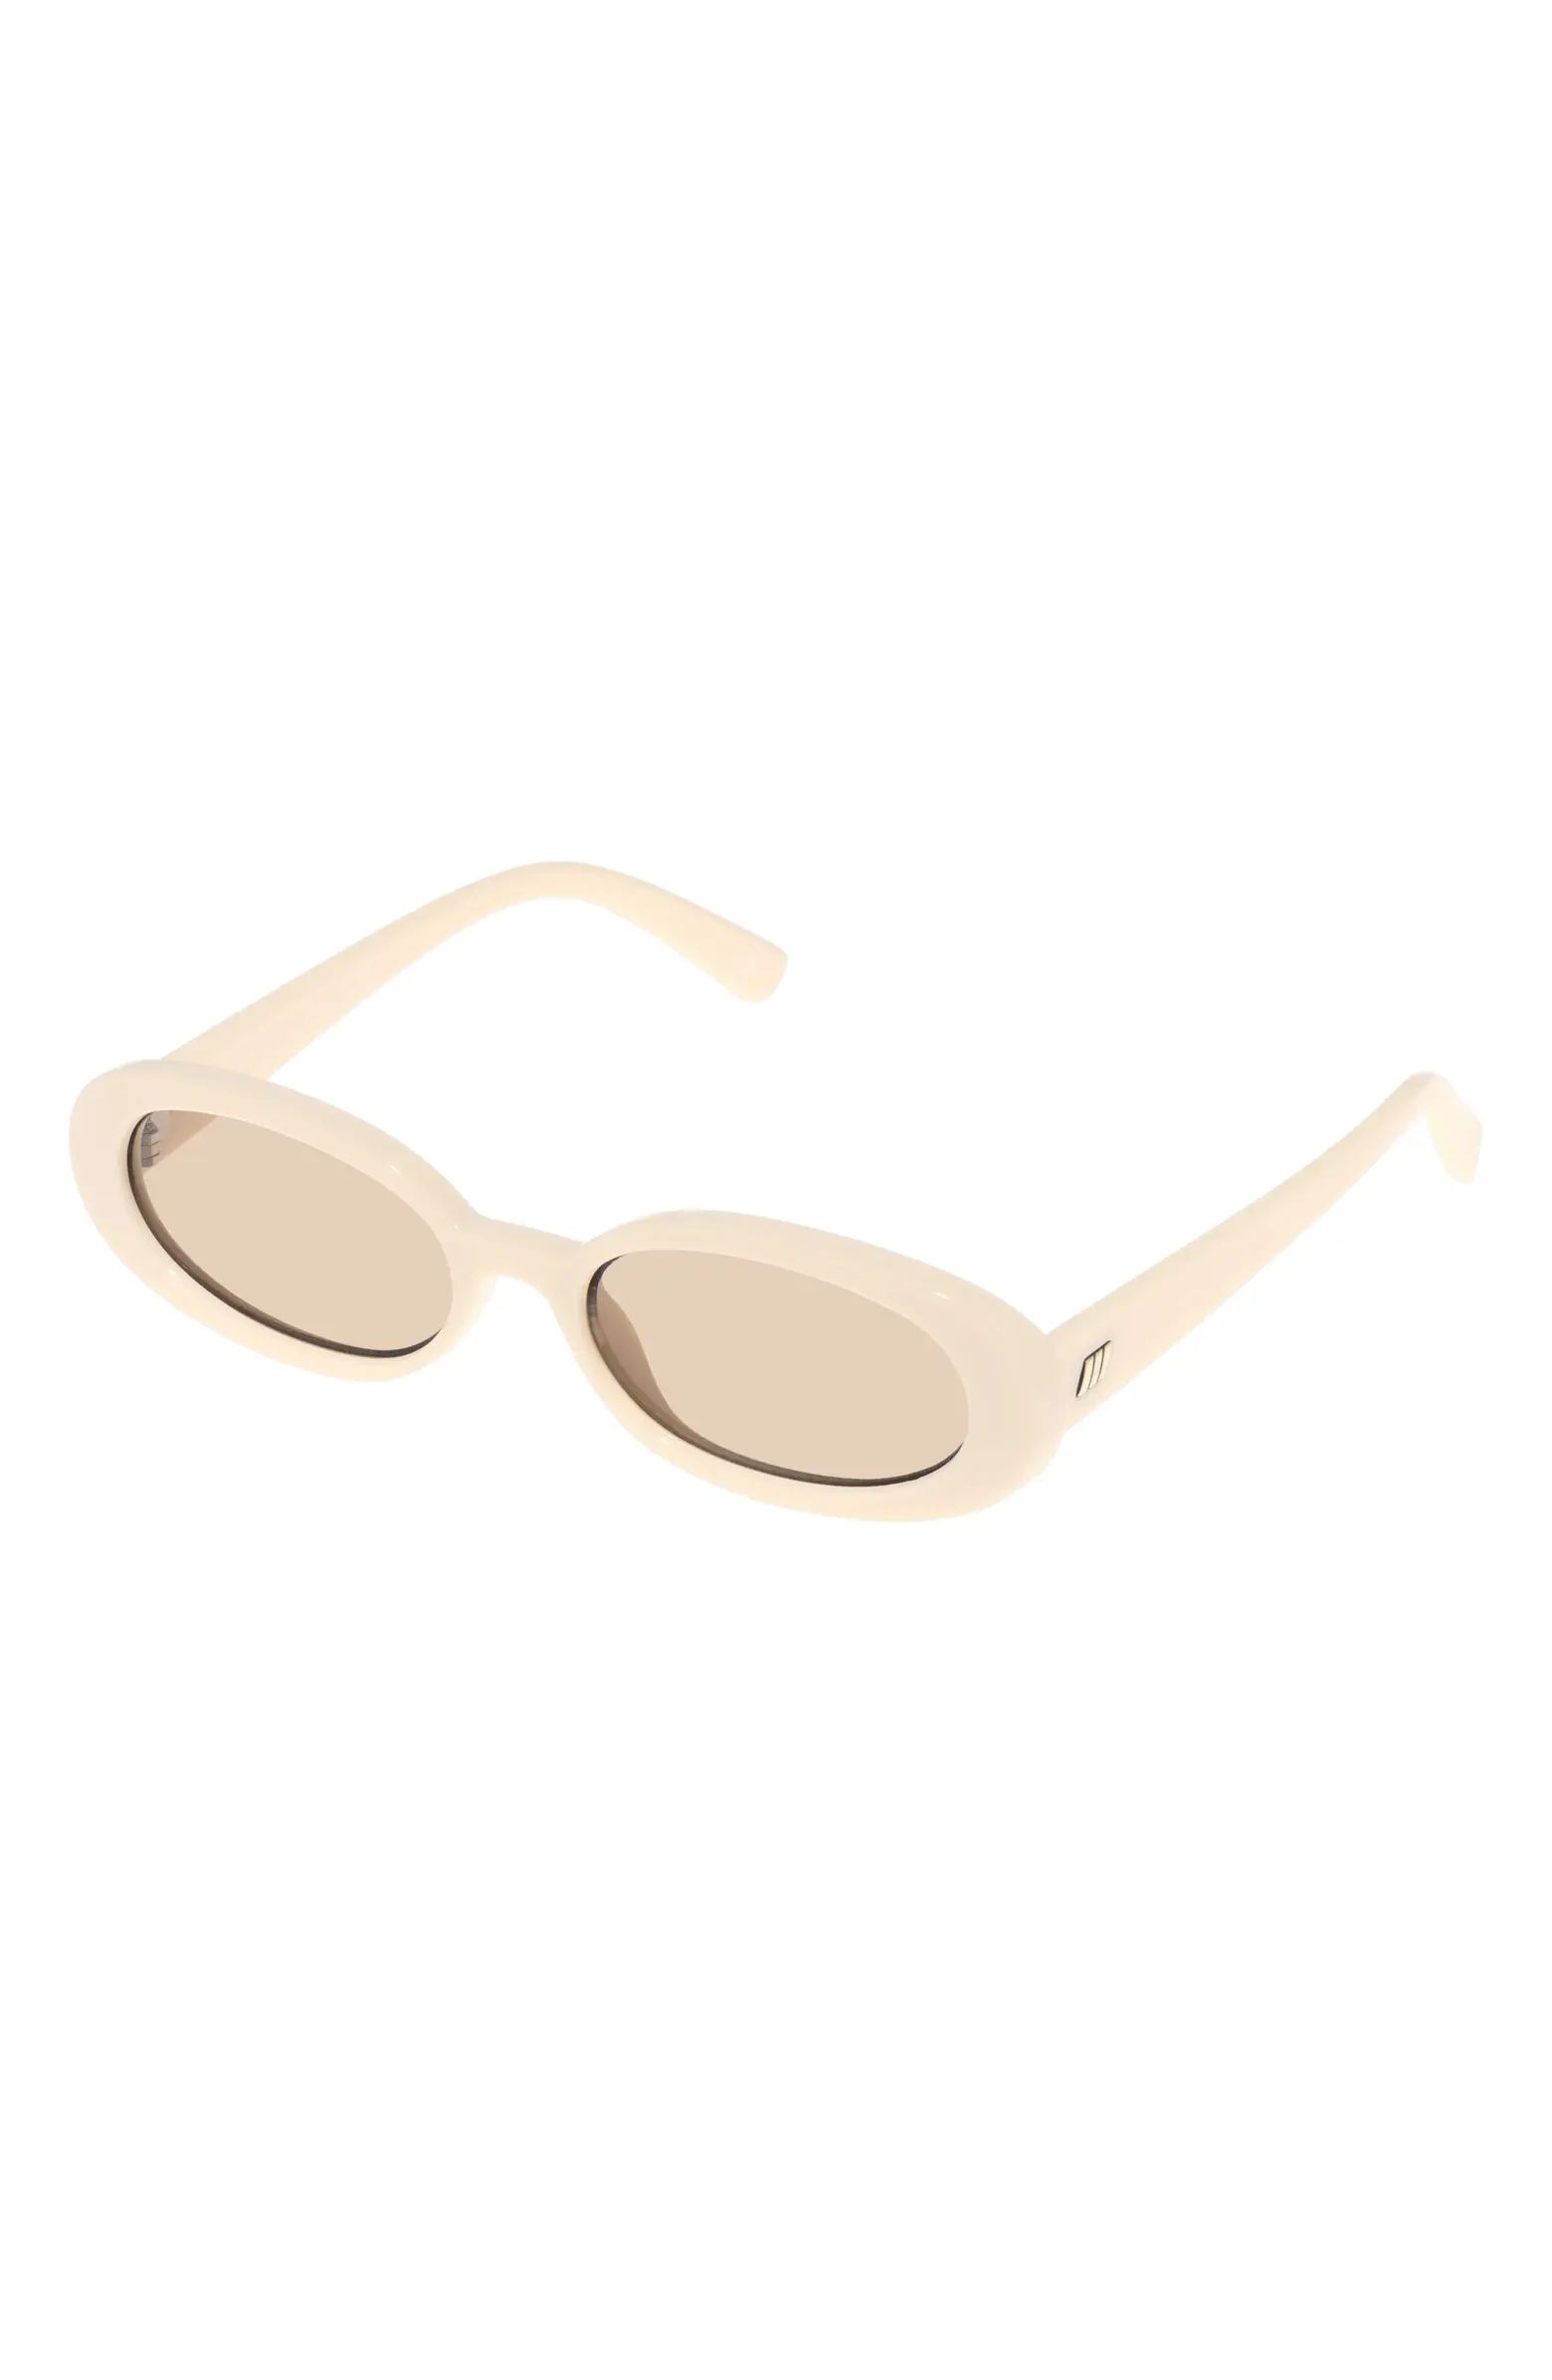 Outta Love 51mm Oval Sunglasses | Nordstrom